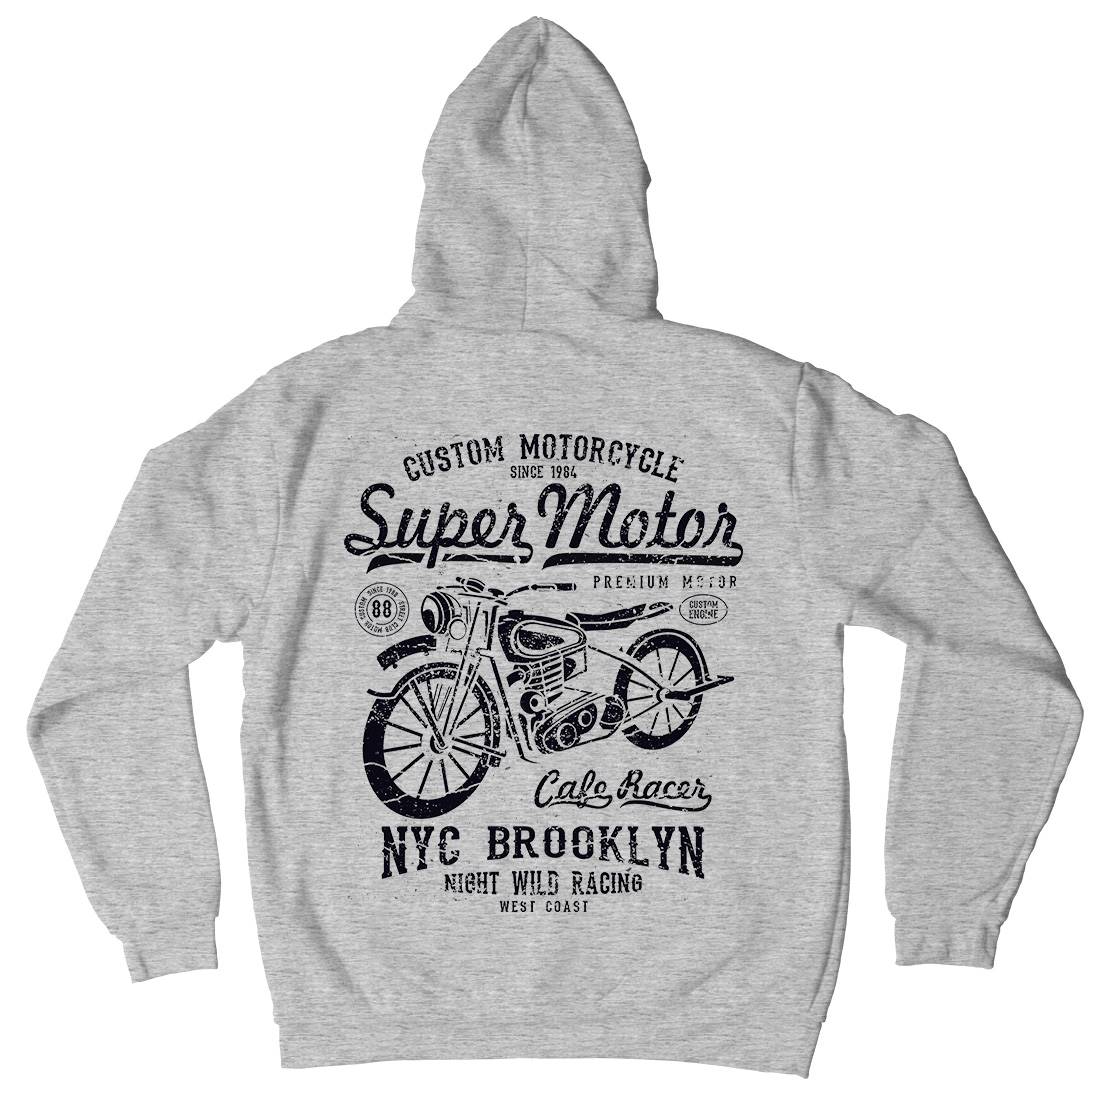 Super Motor Mens Hoodie With Pocket Motorcycles A166